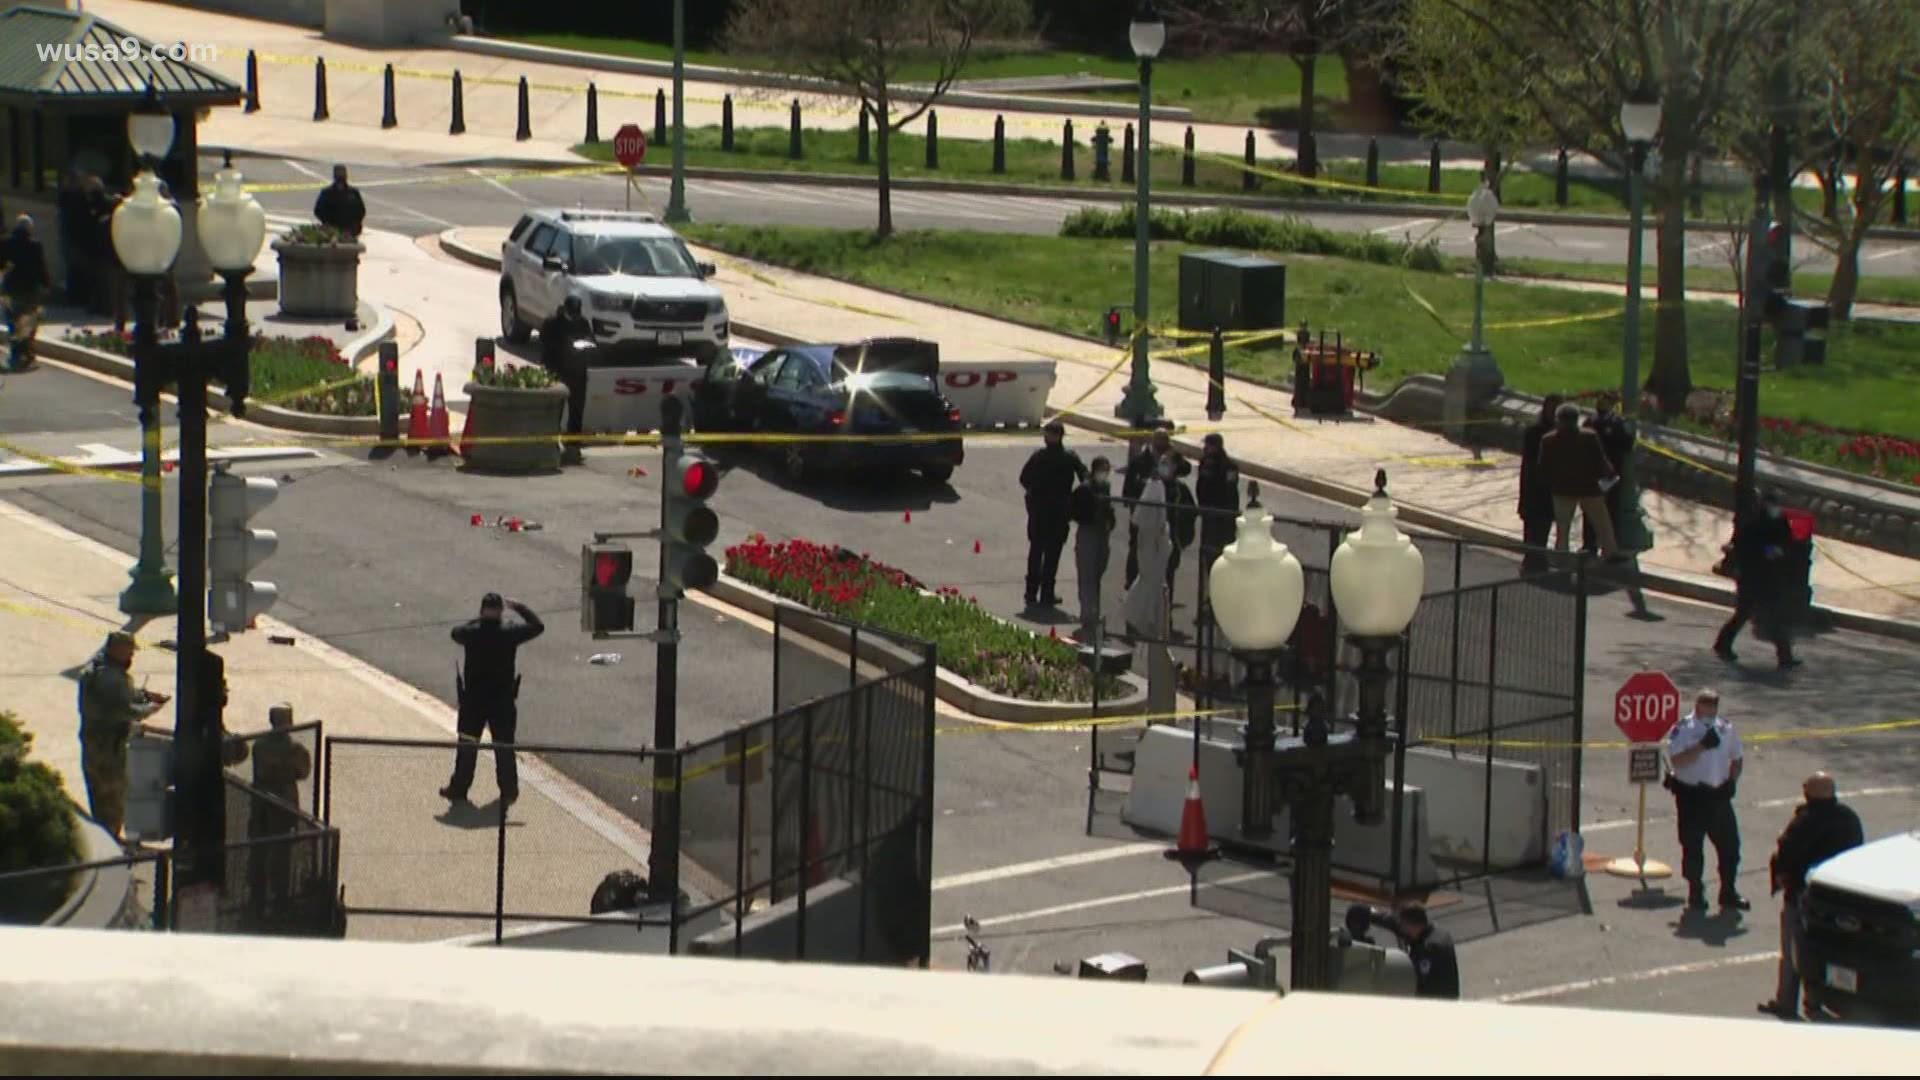 The security concerns follow the killing of a Capitol Police officer on Friday when a man drove into two officers at a security checkpoint.